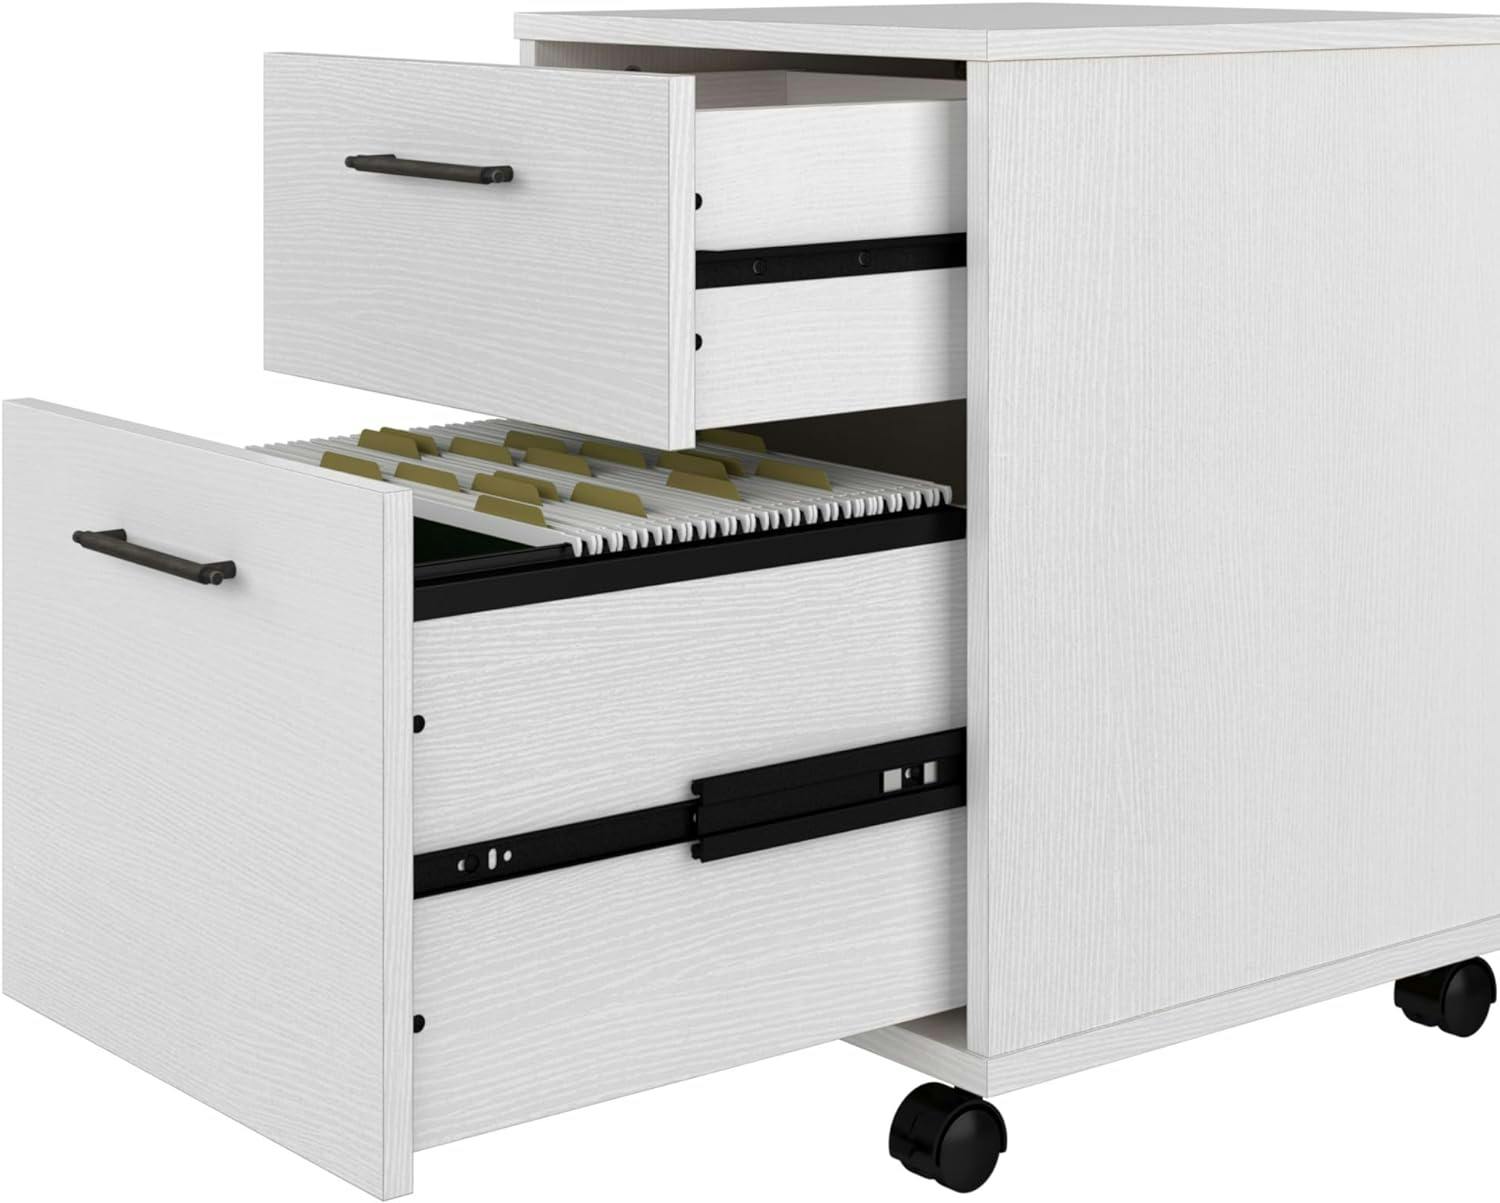 Pure White Oak Mobile Pedestal File Cabinet with Locking Casters